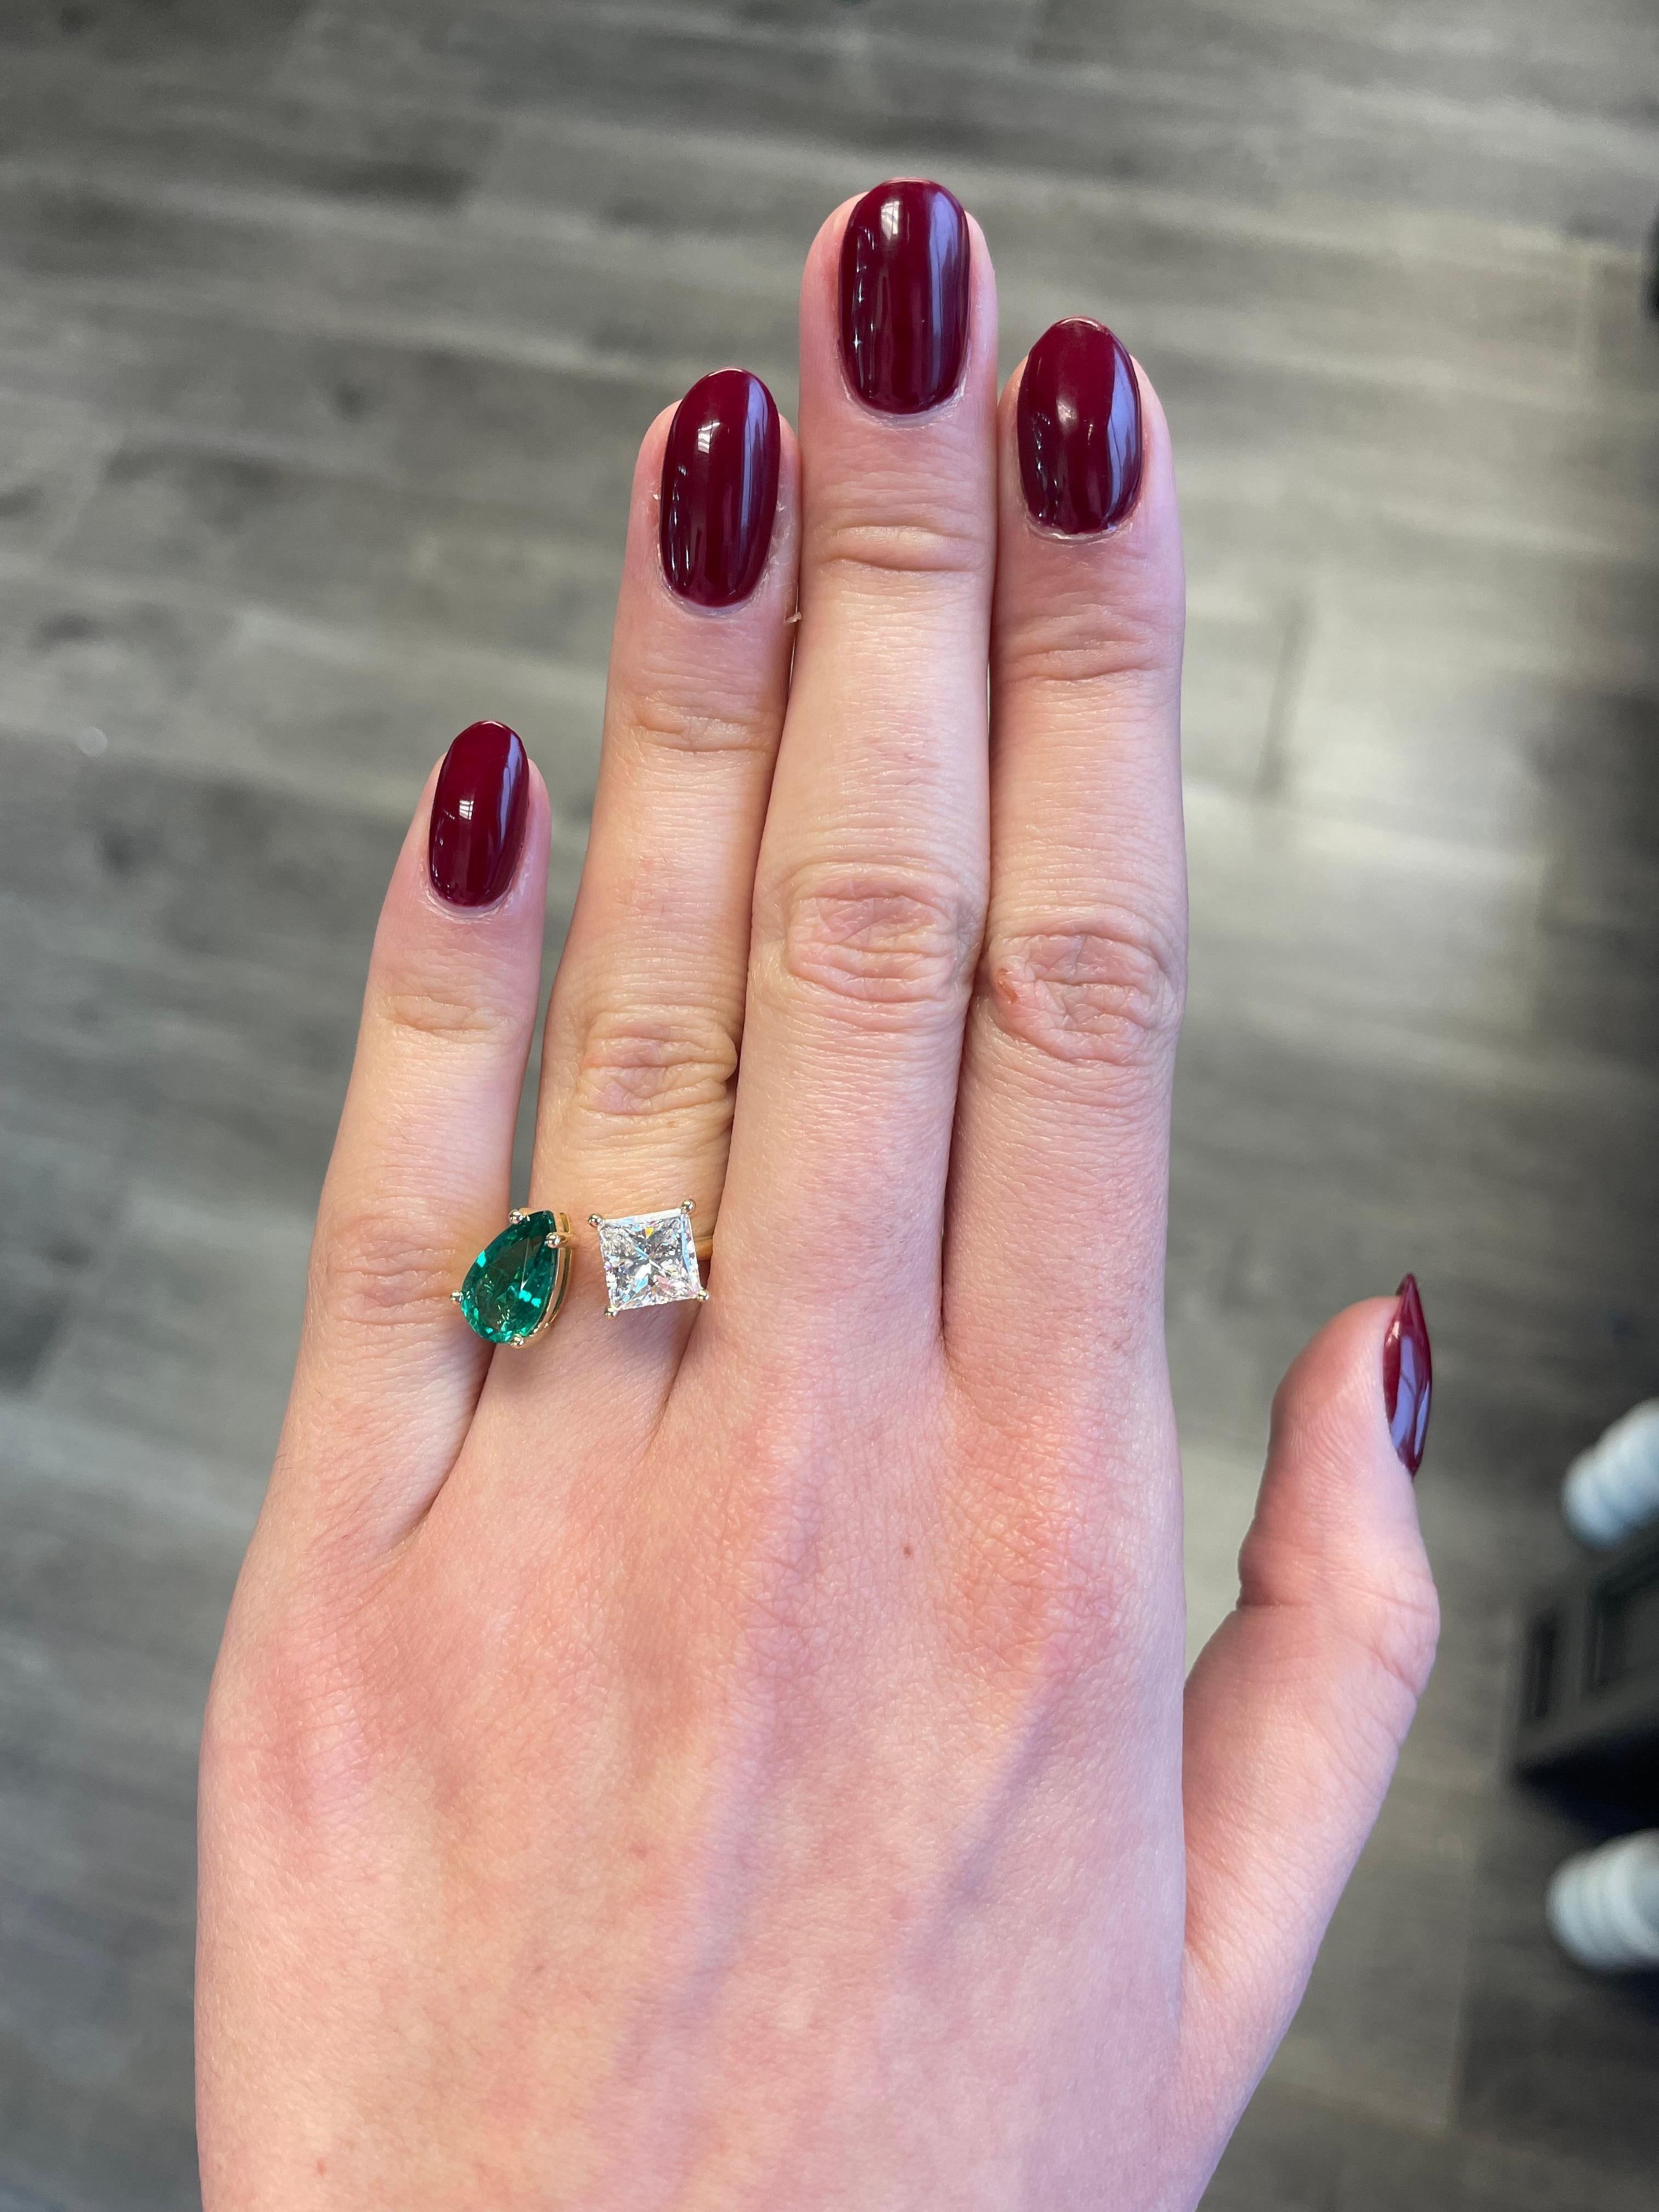 Stunning modern floating emerald and diamond open shank toi et moi ring, both stones GIA certified. By Alexander Beverly Hills.
1.57 carat princess cut diamond, GIA certified. 1.52 carat pear shape emerald, GIA certified. 18-karat yellow gold,